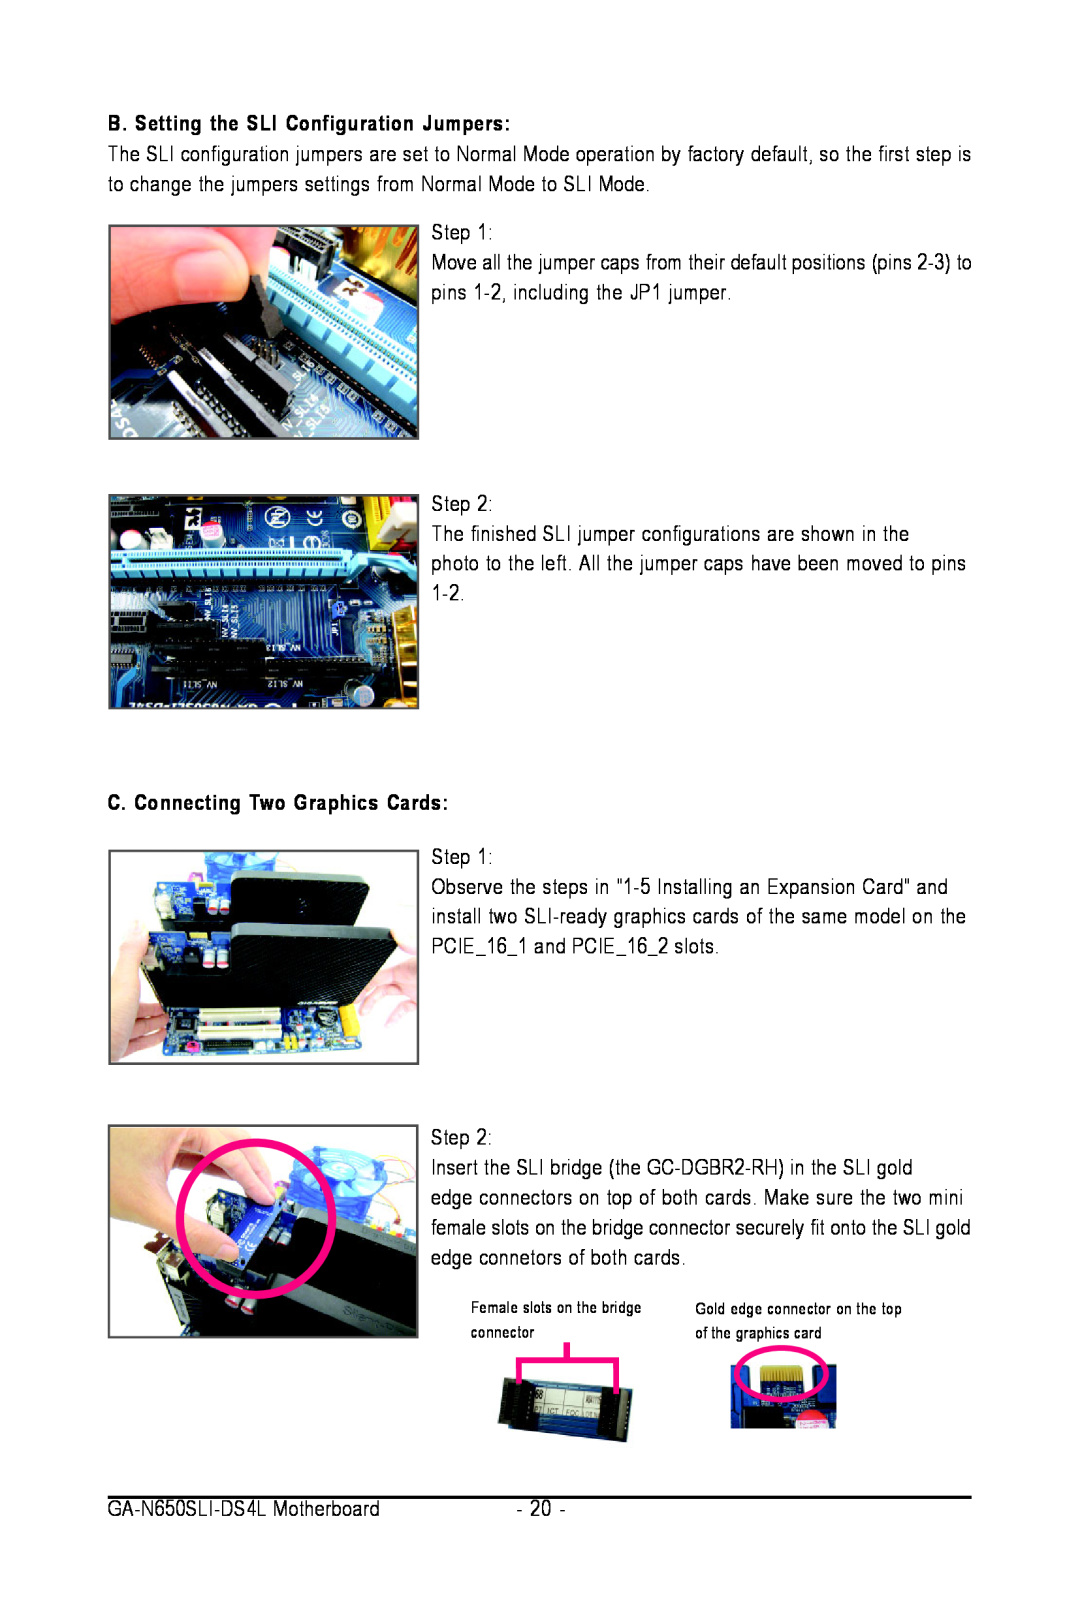 Intel GA-N650SLI-DS4L user manual B. Setting the SLI Configuration Jumpers, C. Connecting Two Graphics Cards, connector 